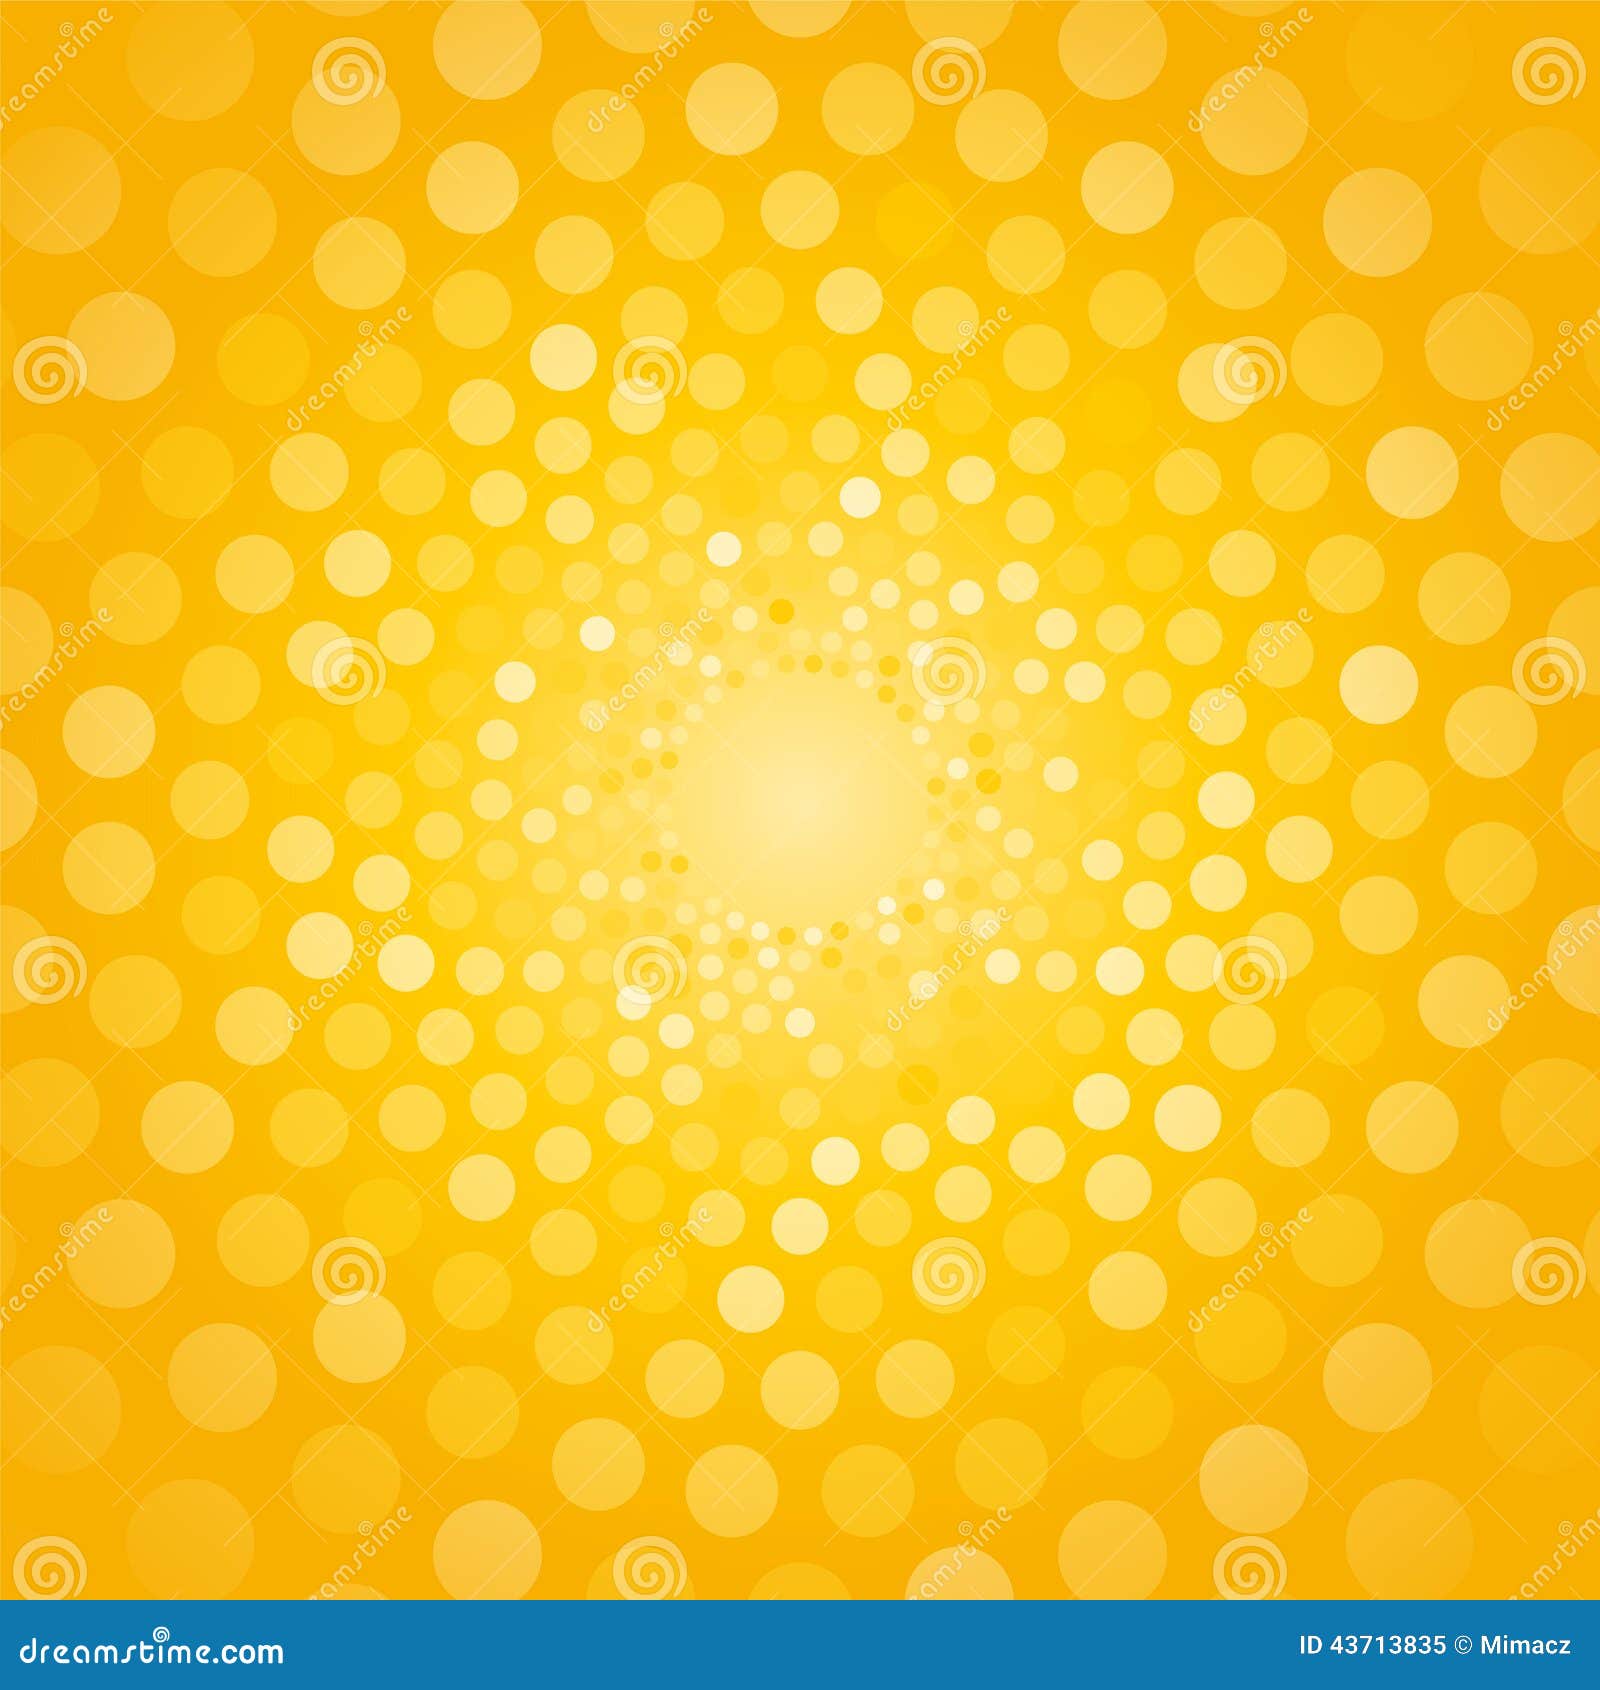 Abstract yellow background stock vector. Illustration of yellow - 43713835